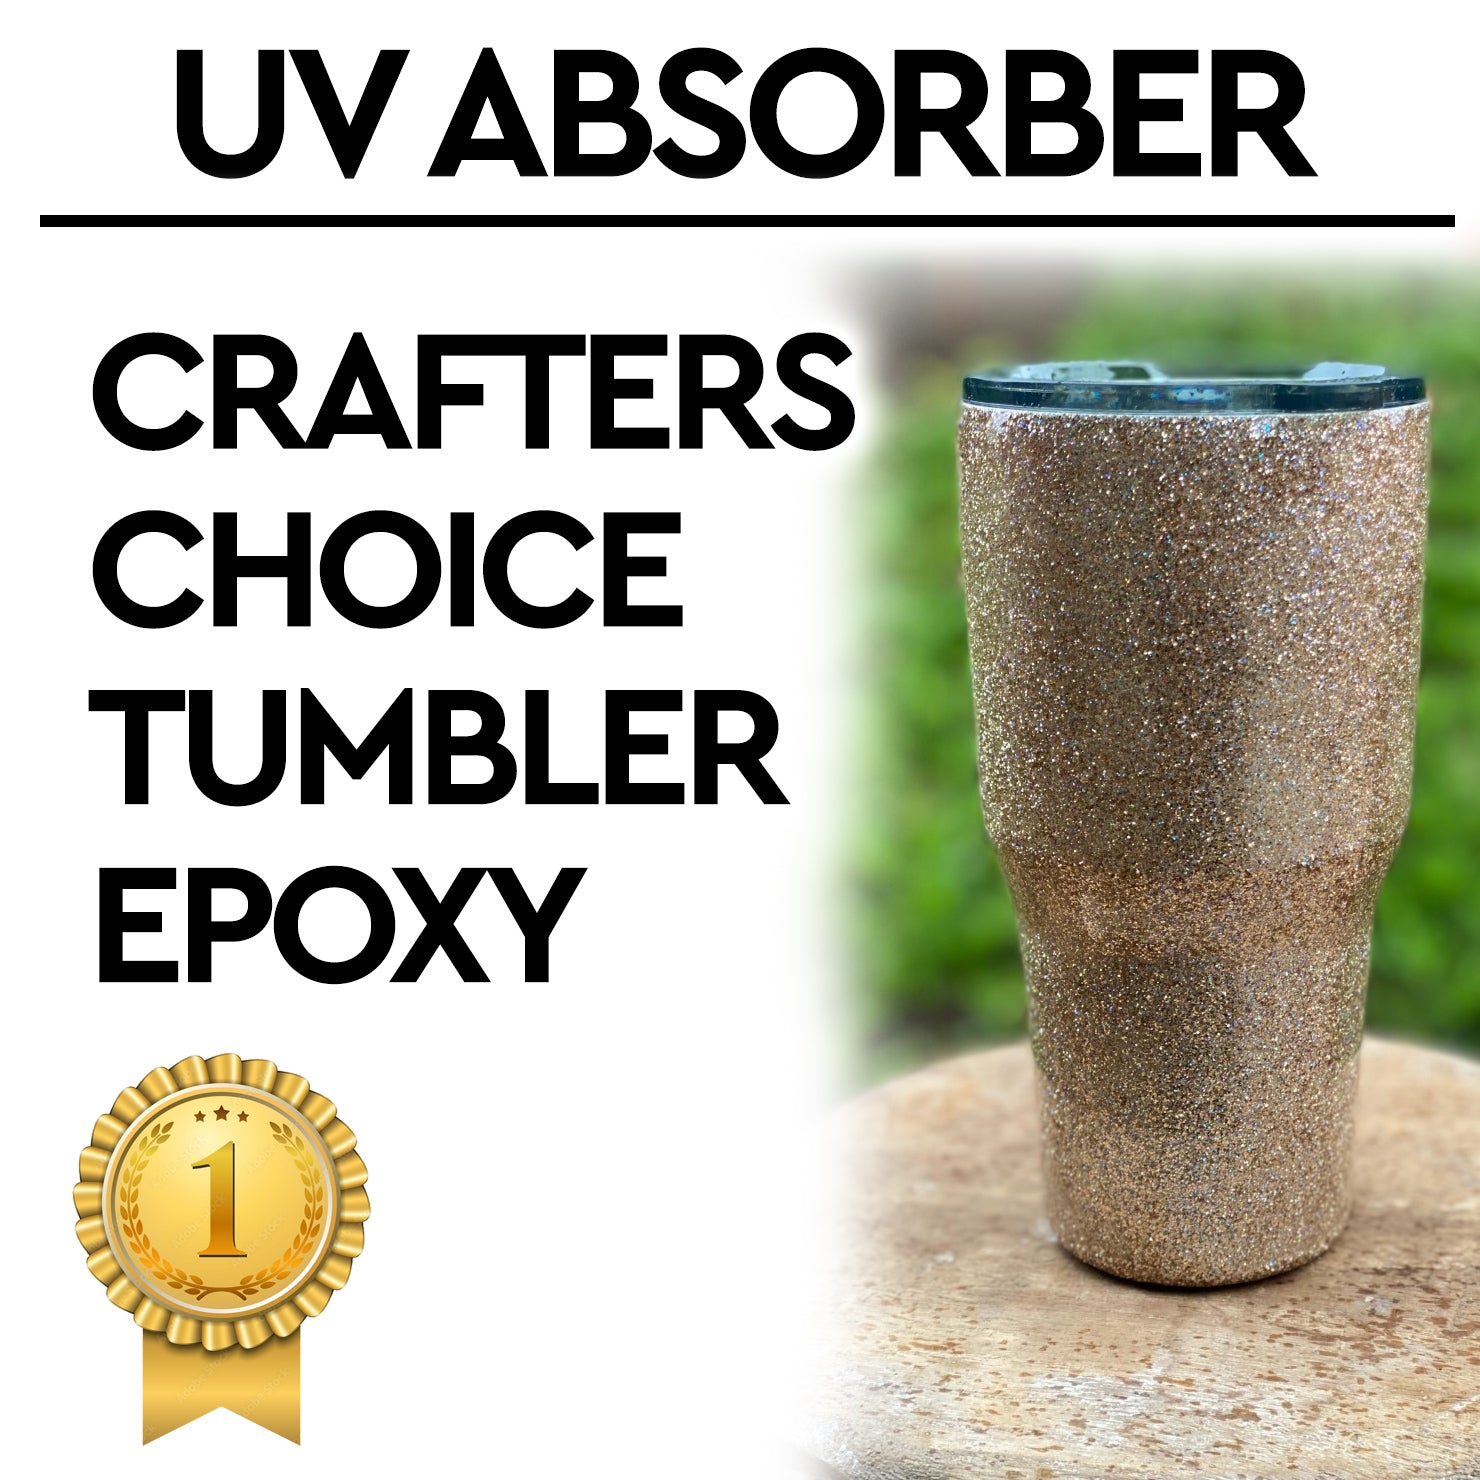 DID YOU HEAR? PERFECT FINISH PREMIUM EPOXY RESIN FOR TUMBLERS IS HERE!